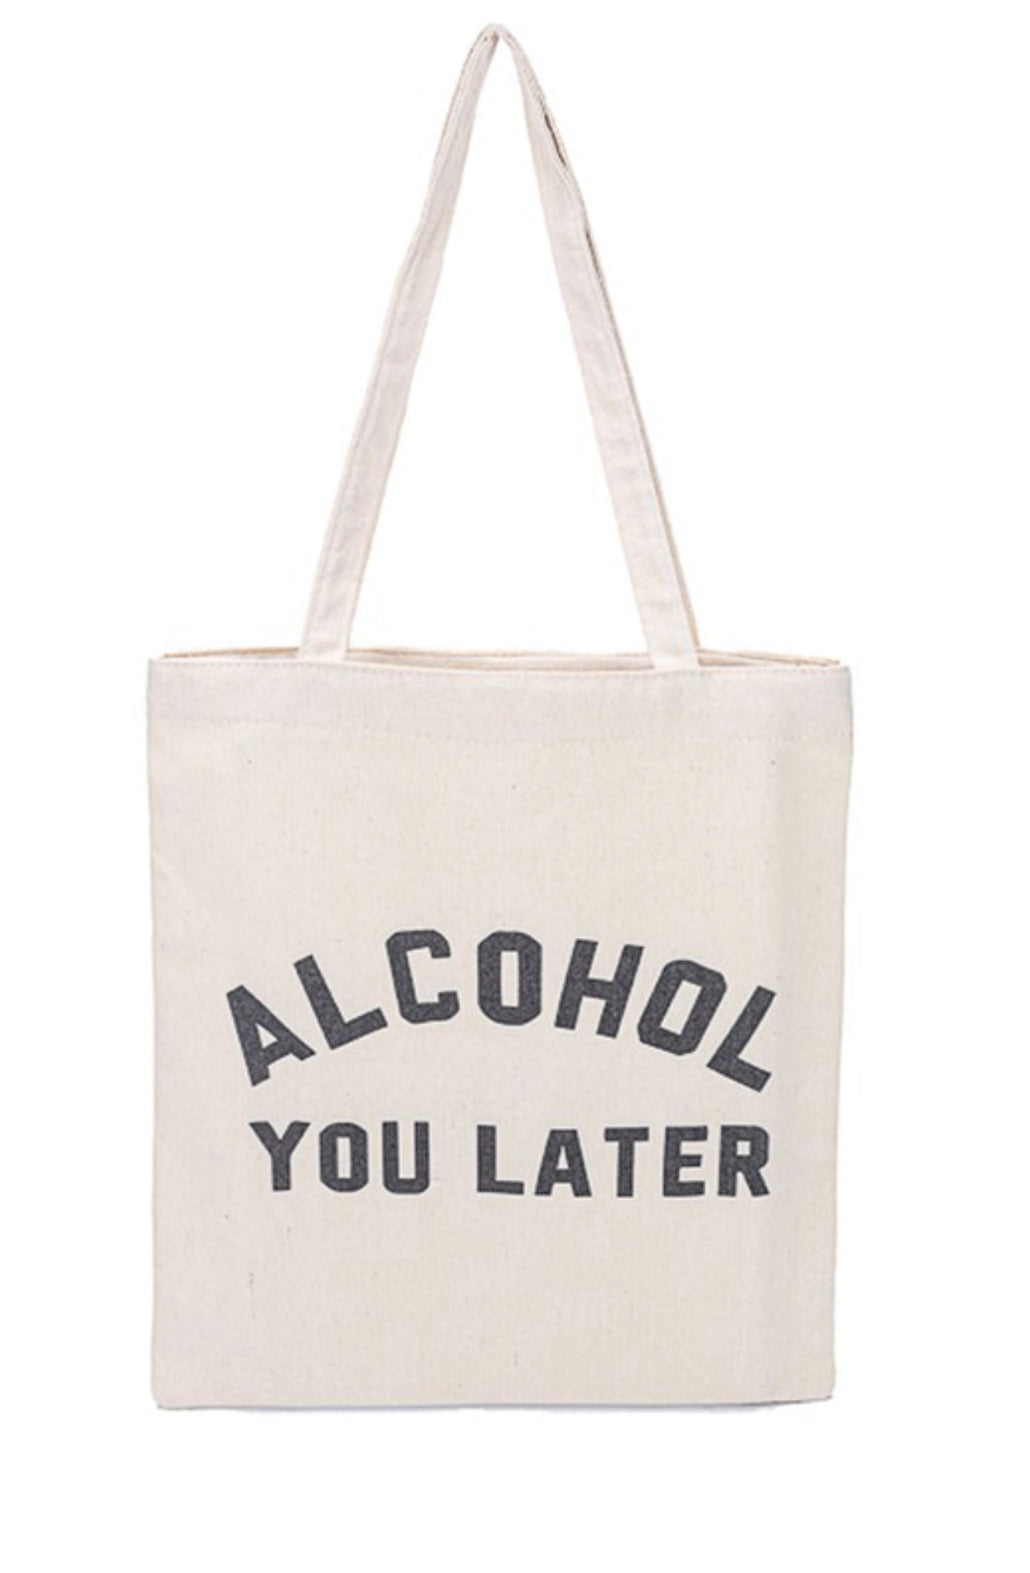 Alcohol You Later Tote Bag in Natural